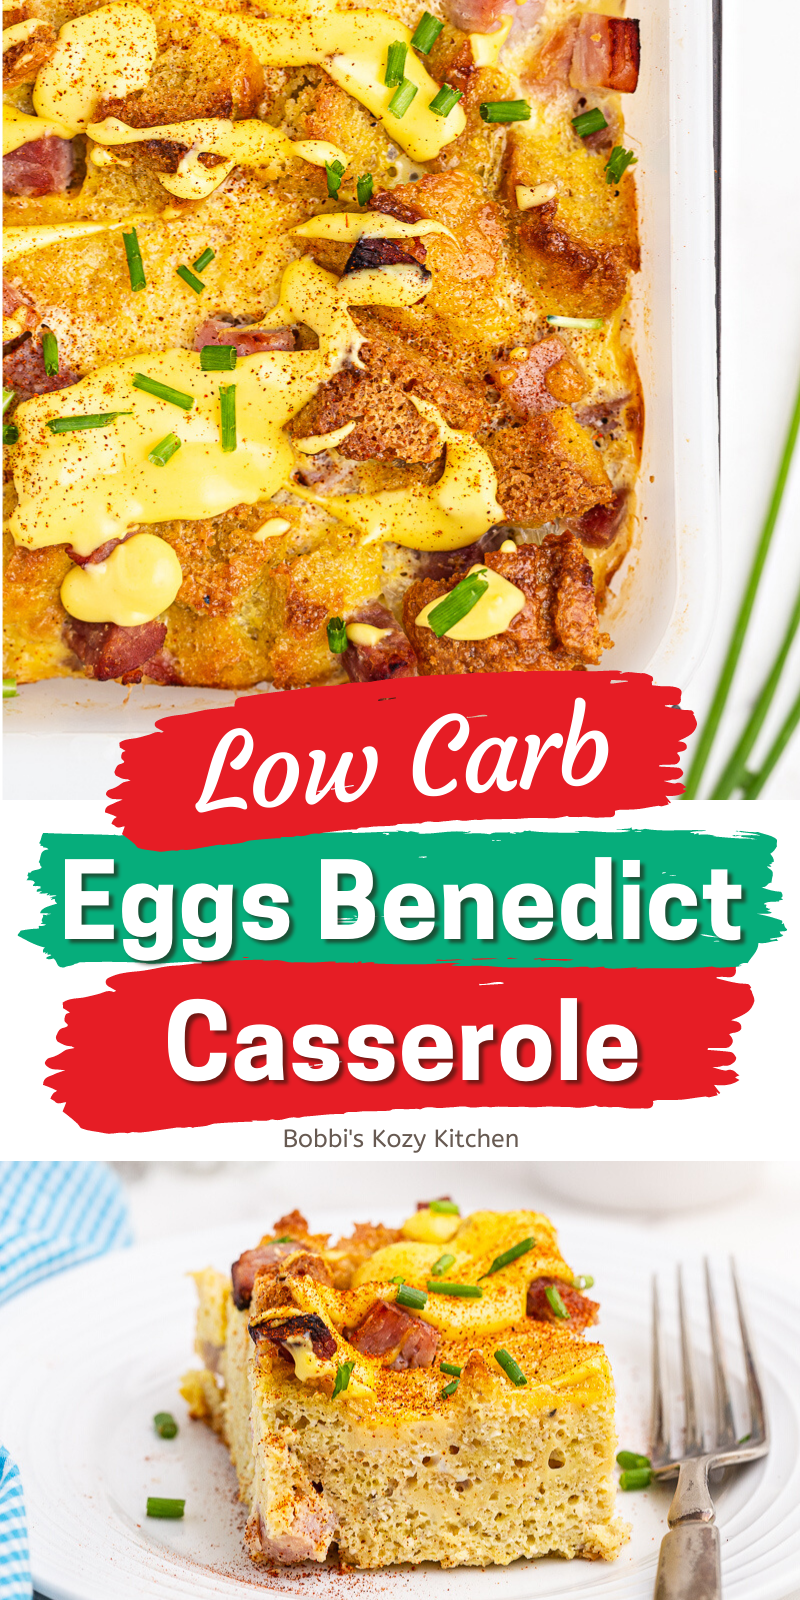 Low Carb Eggs Benedict Casserole - This low-carb casserole brings you all of the flavors you love in a classic eggs benedict without those pesky carbs. Bonus is the easy-to-make hollandaise sauce that you will want to put on everything! #lowcarb #keto #glutenfree #breakfast #brunch #christmas #easter #thanksgiving